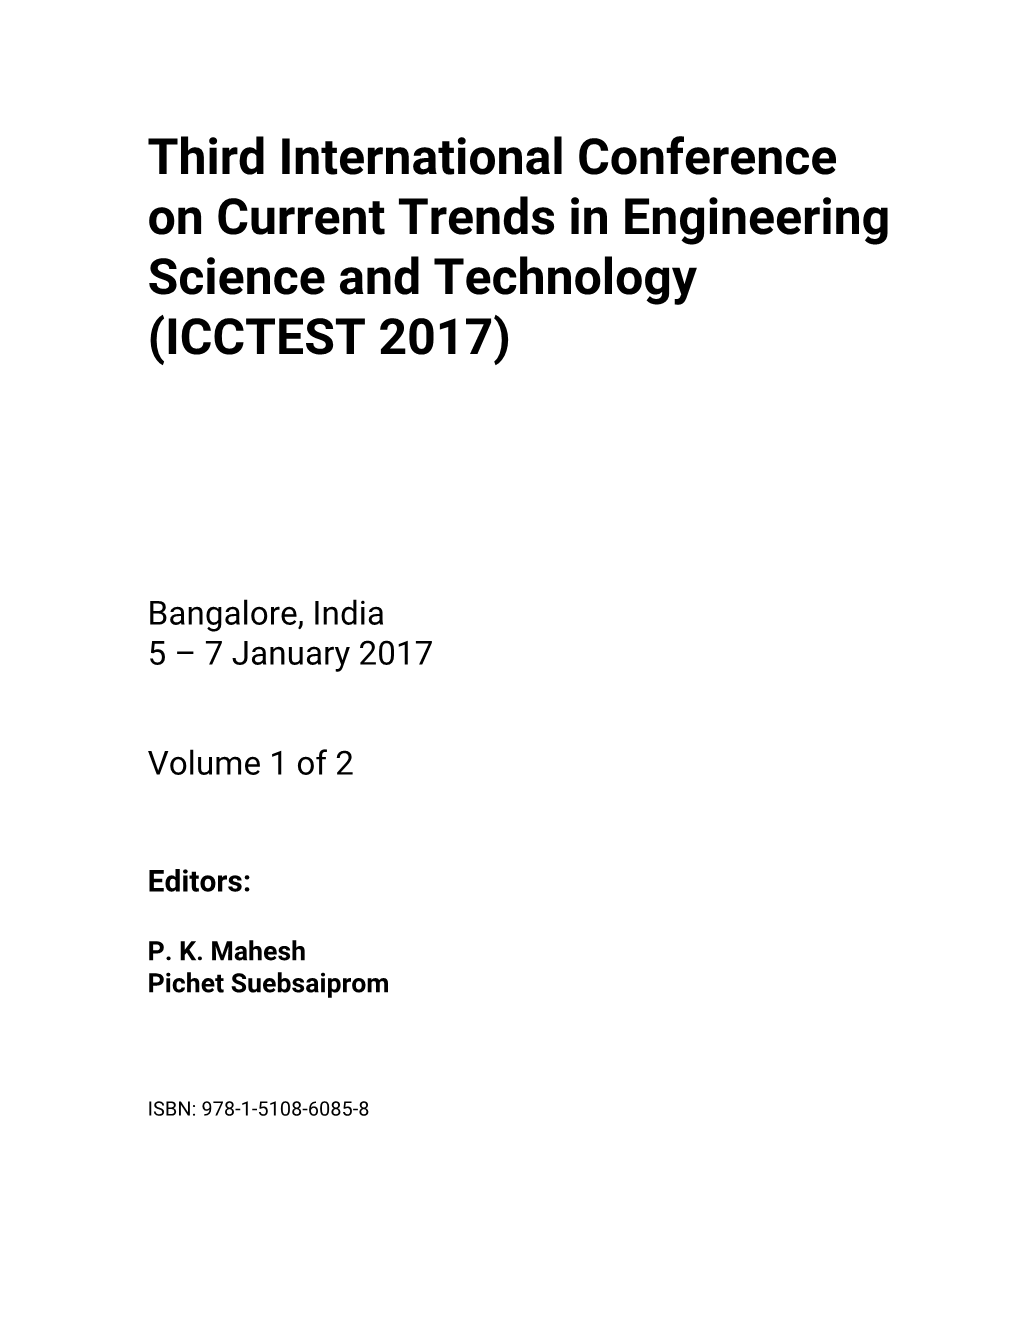 Third International Conference on Current Trends in Engineering